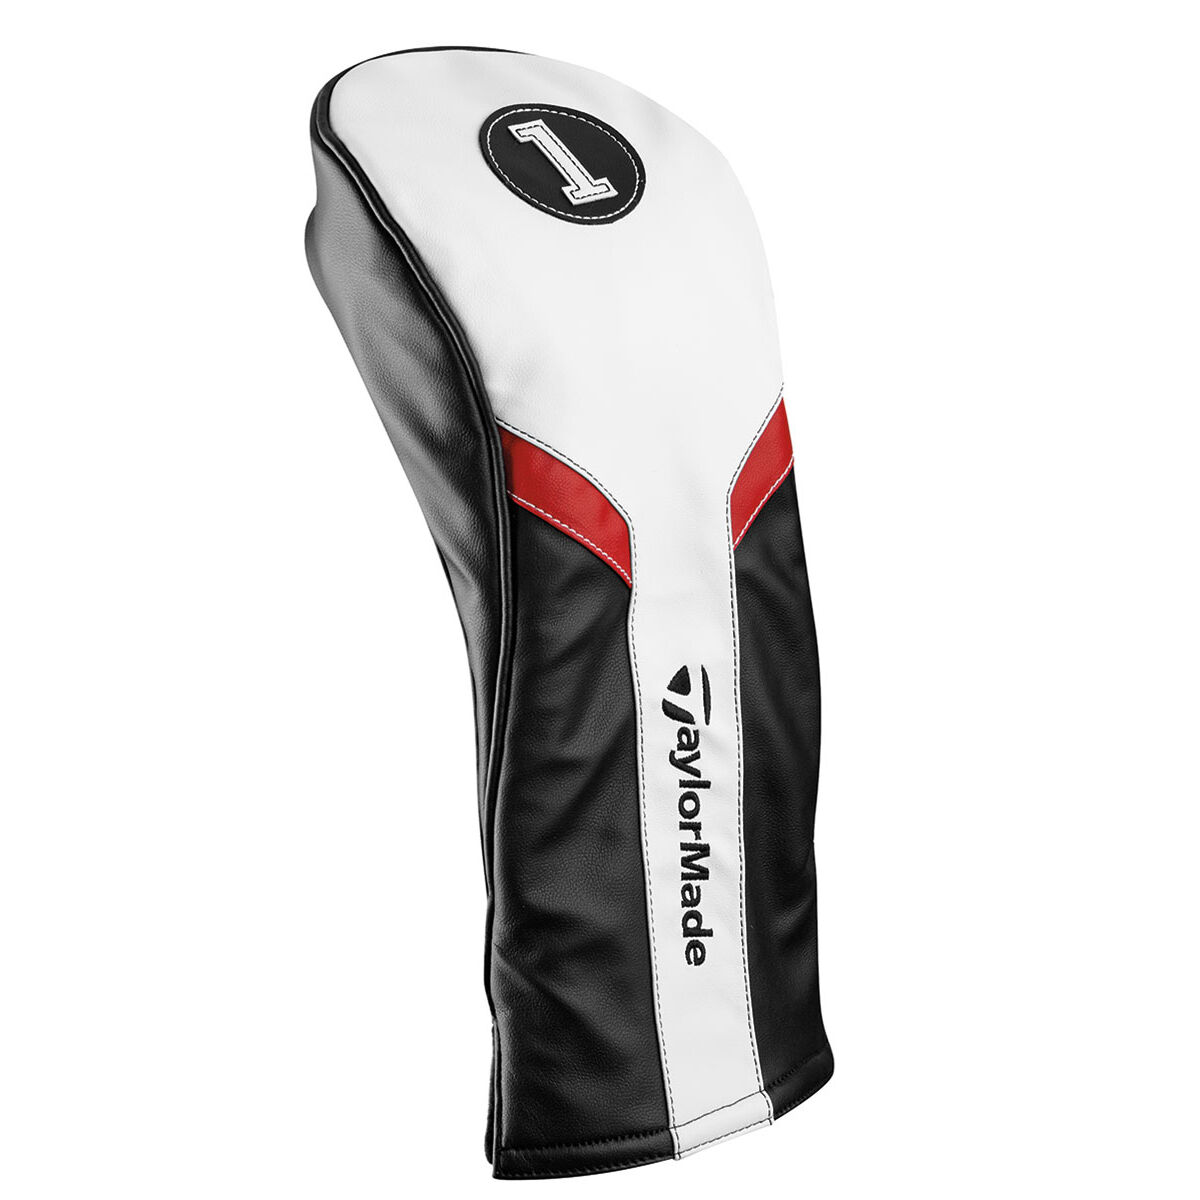 Couvre-club TaylorMade Golf Driver, homme, Noir/Blanc/Rouge | Online Golf